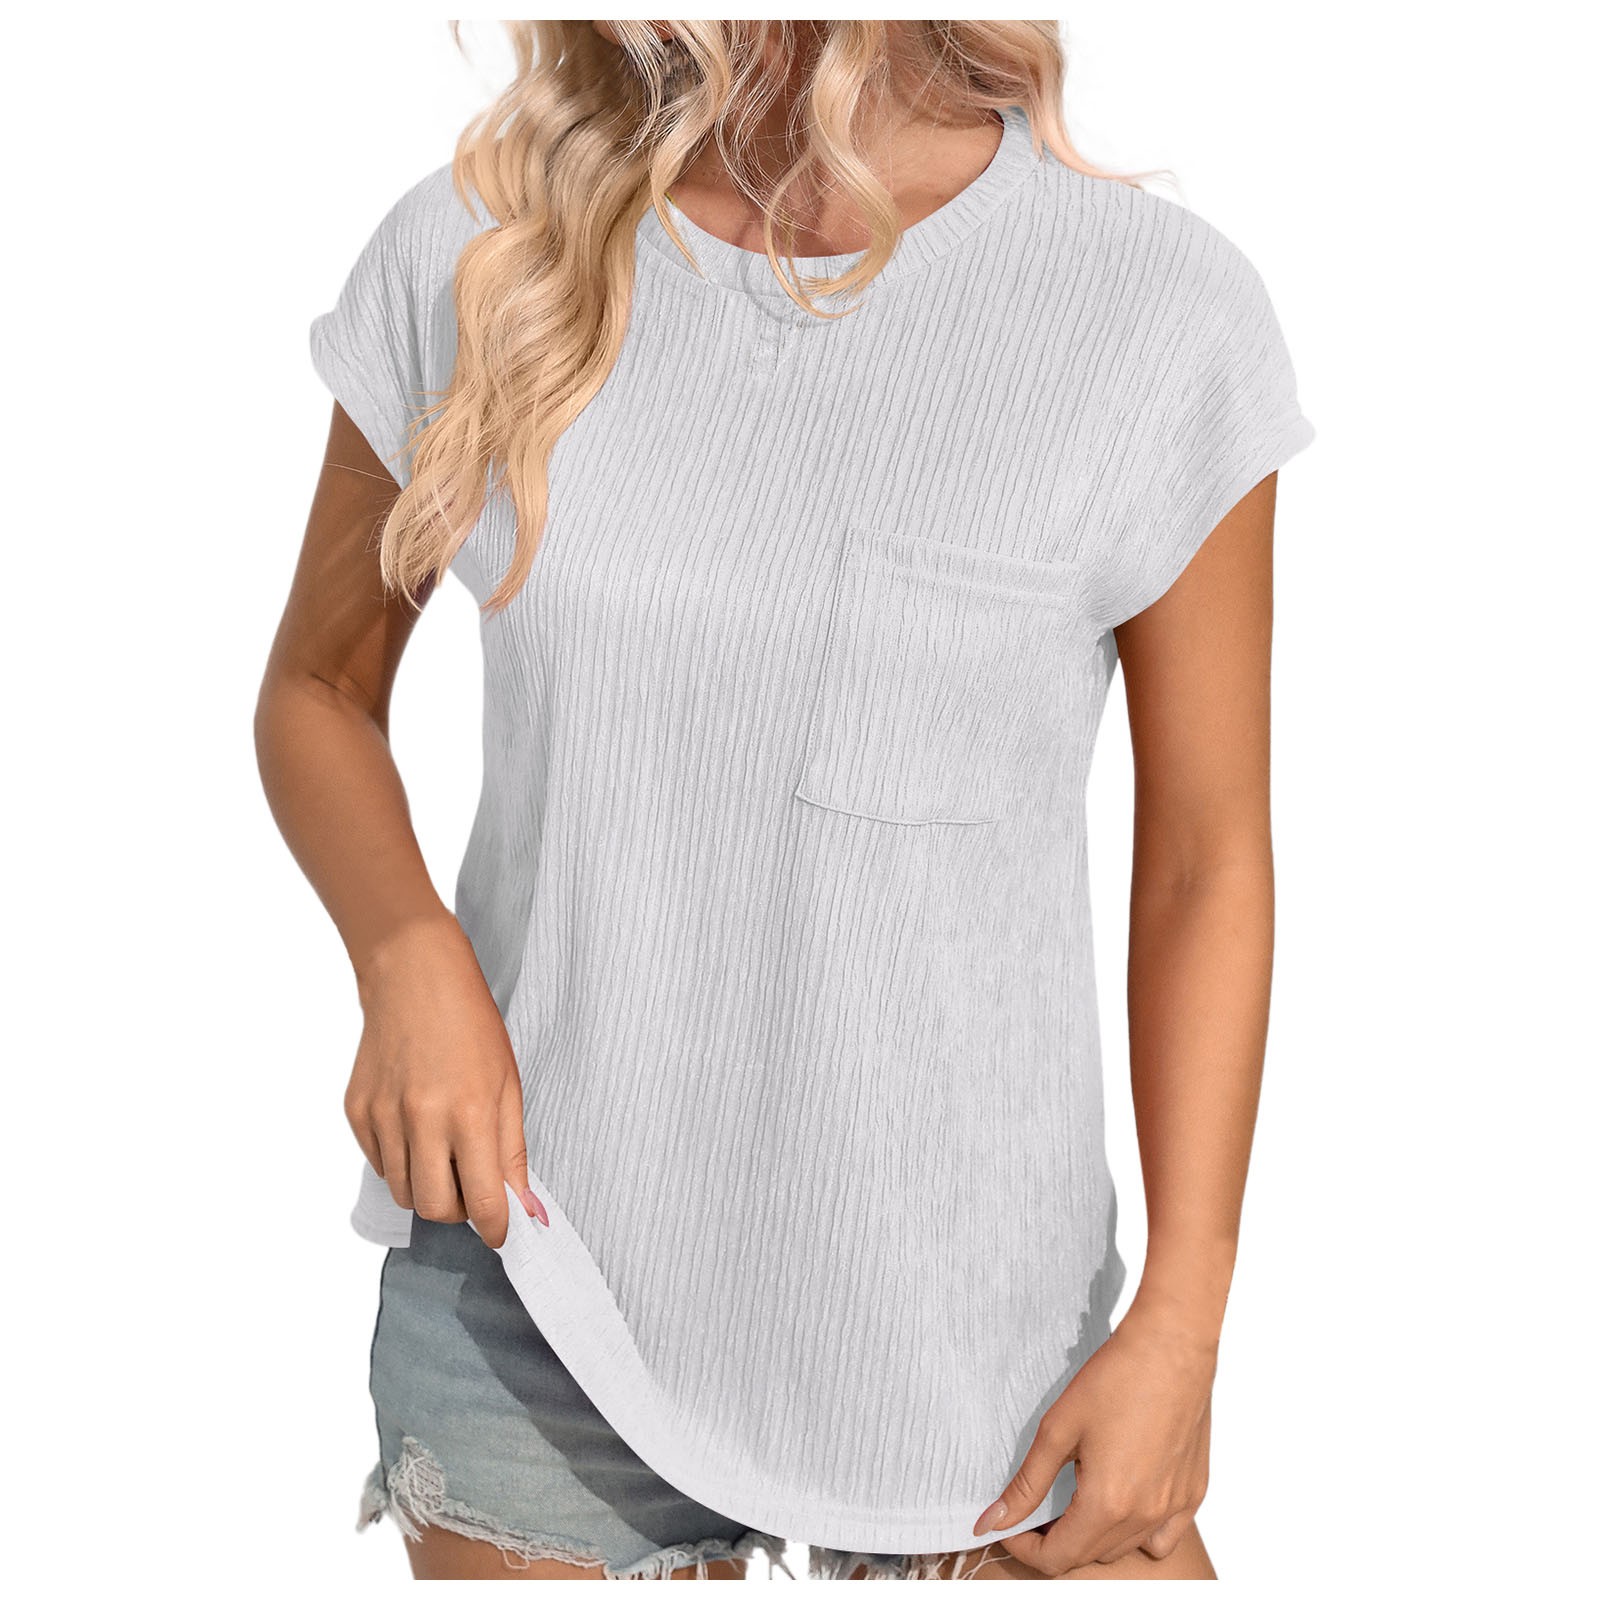 Sleeve Shirt Top For Womens Trendy Crew Neck Blouse Basic Textured ...